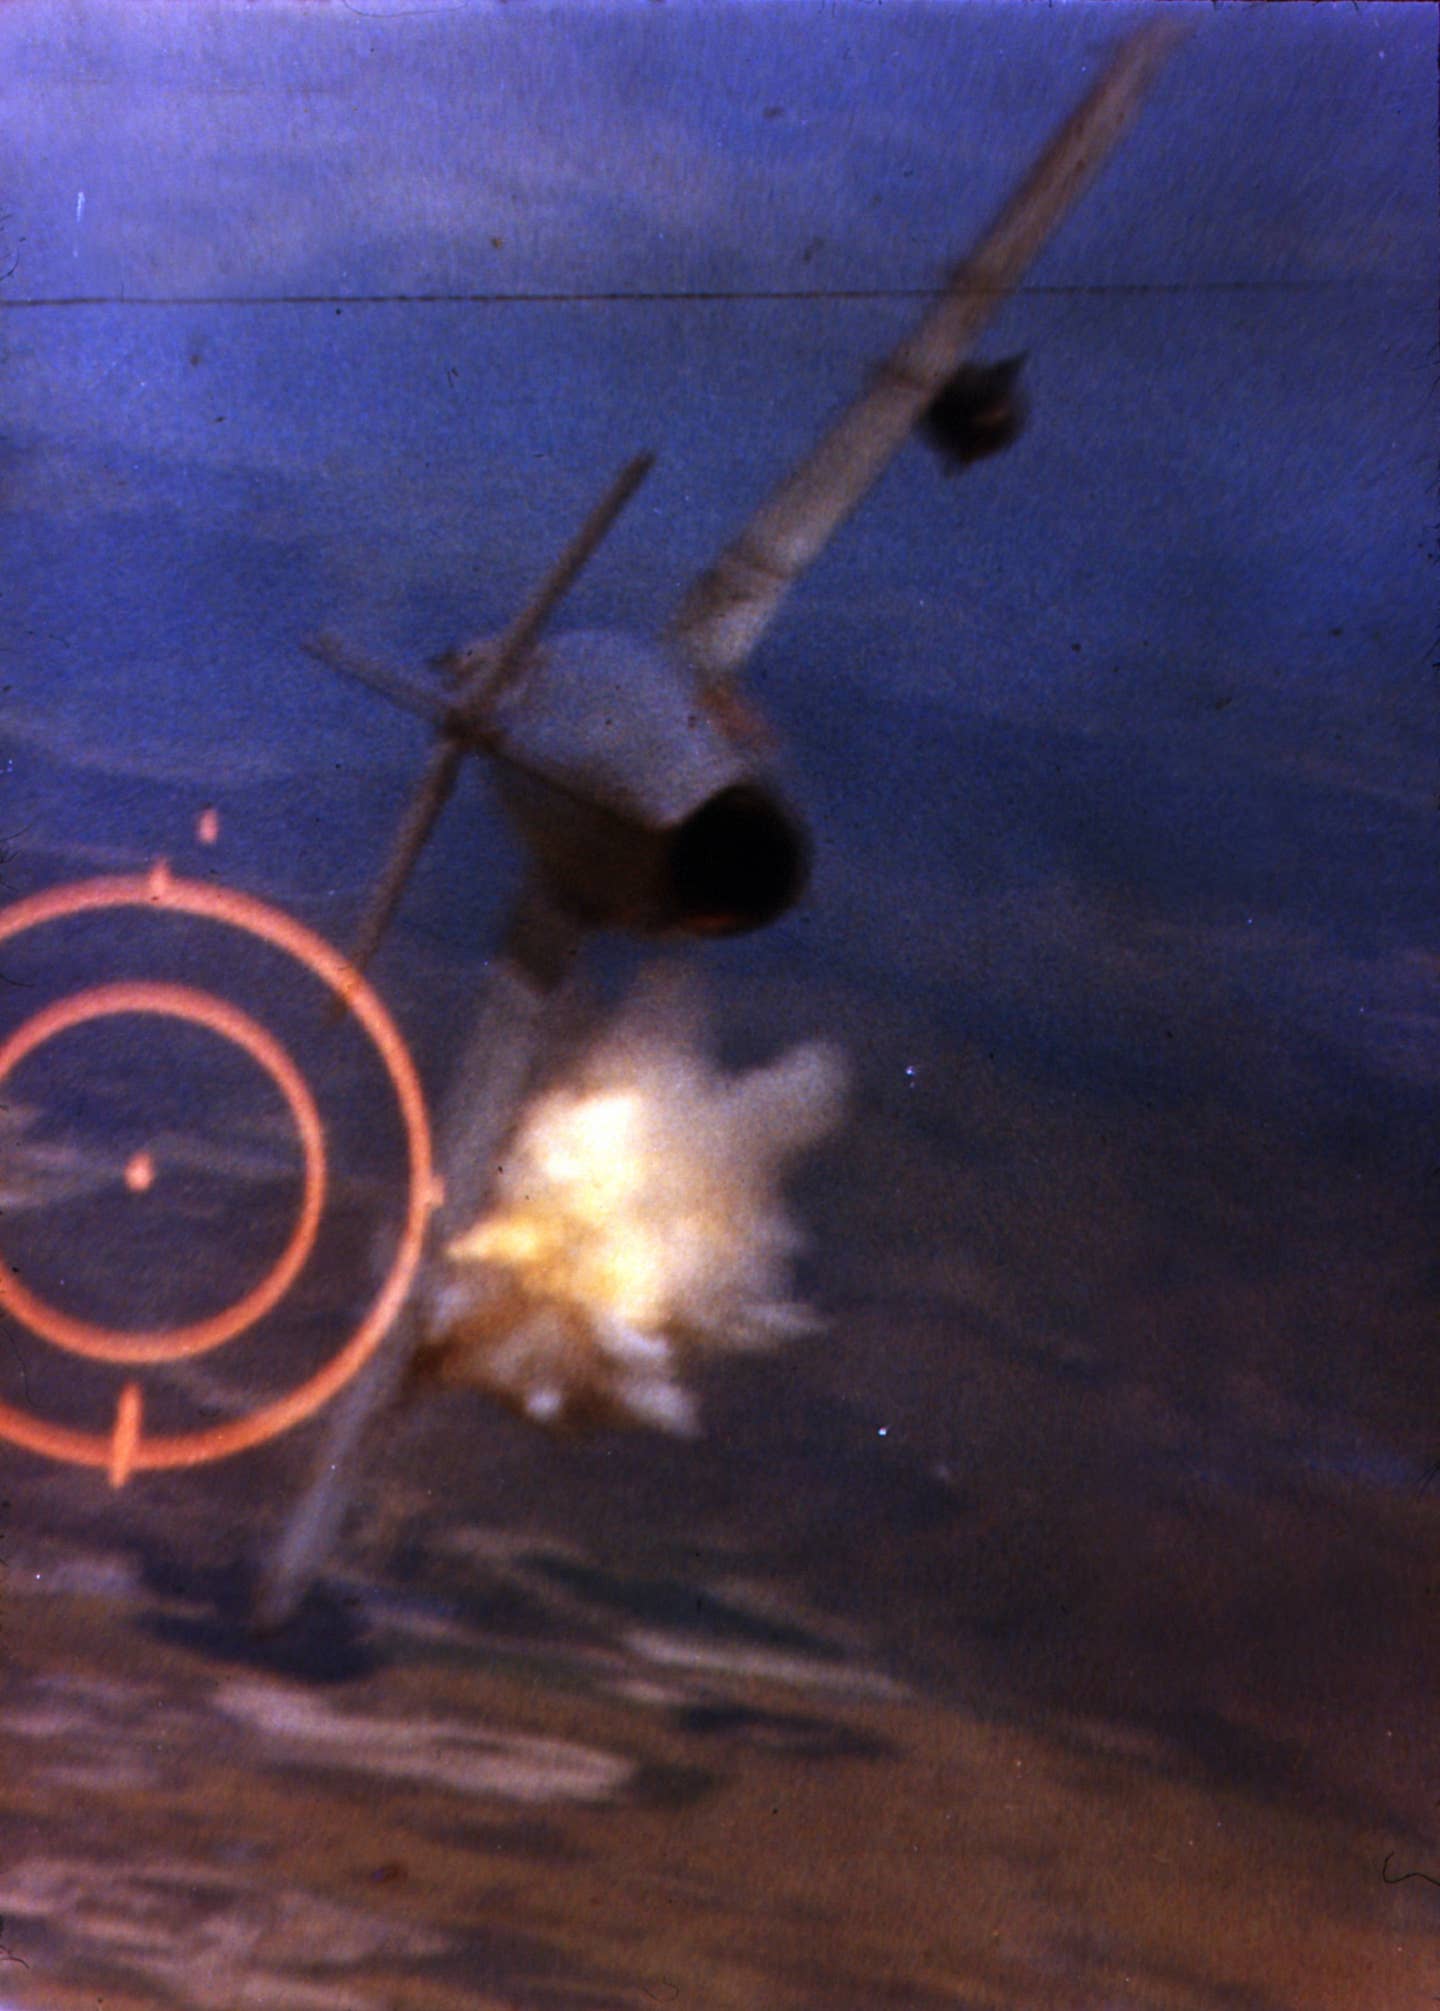 A MiG-17 is shot down by an F-105D on Jun. 3, 1967 over Vietnam. (Photo from U.S. Air Force)